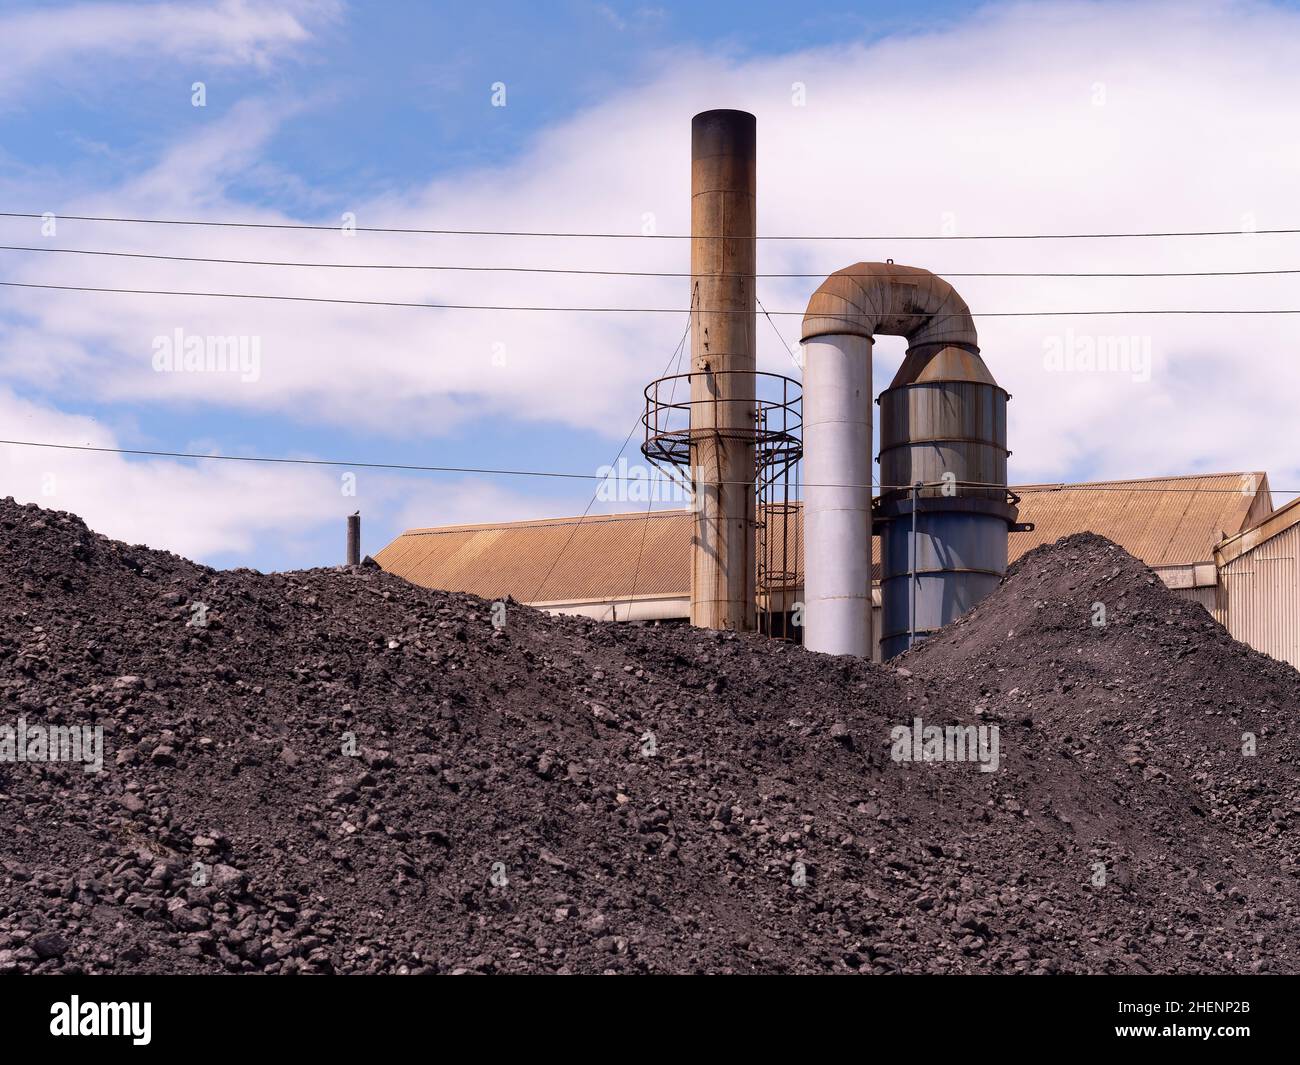 Heaps of coal used to produce steam with boilers at industrial plant. Smoke stack of boiler in the background. Stock Photo